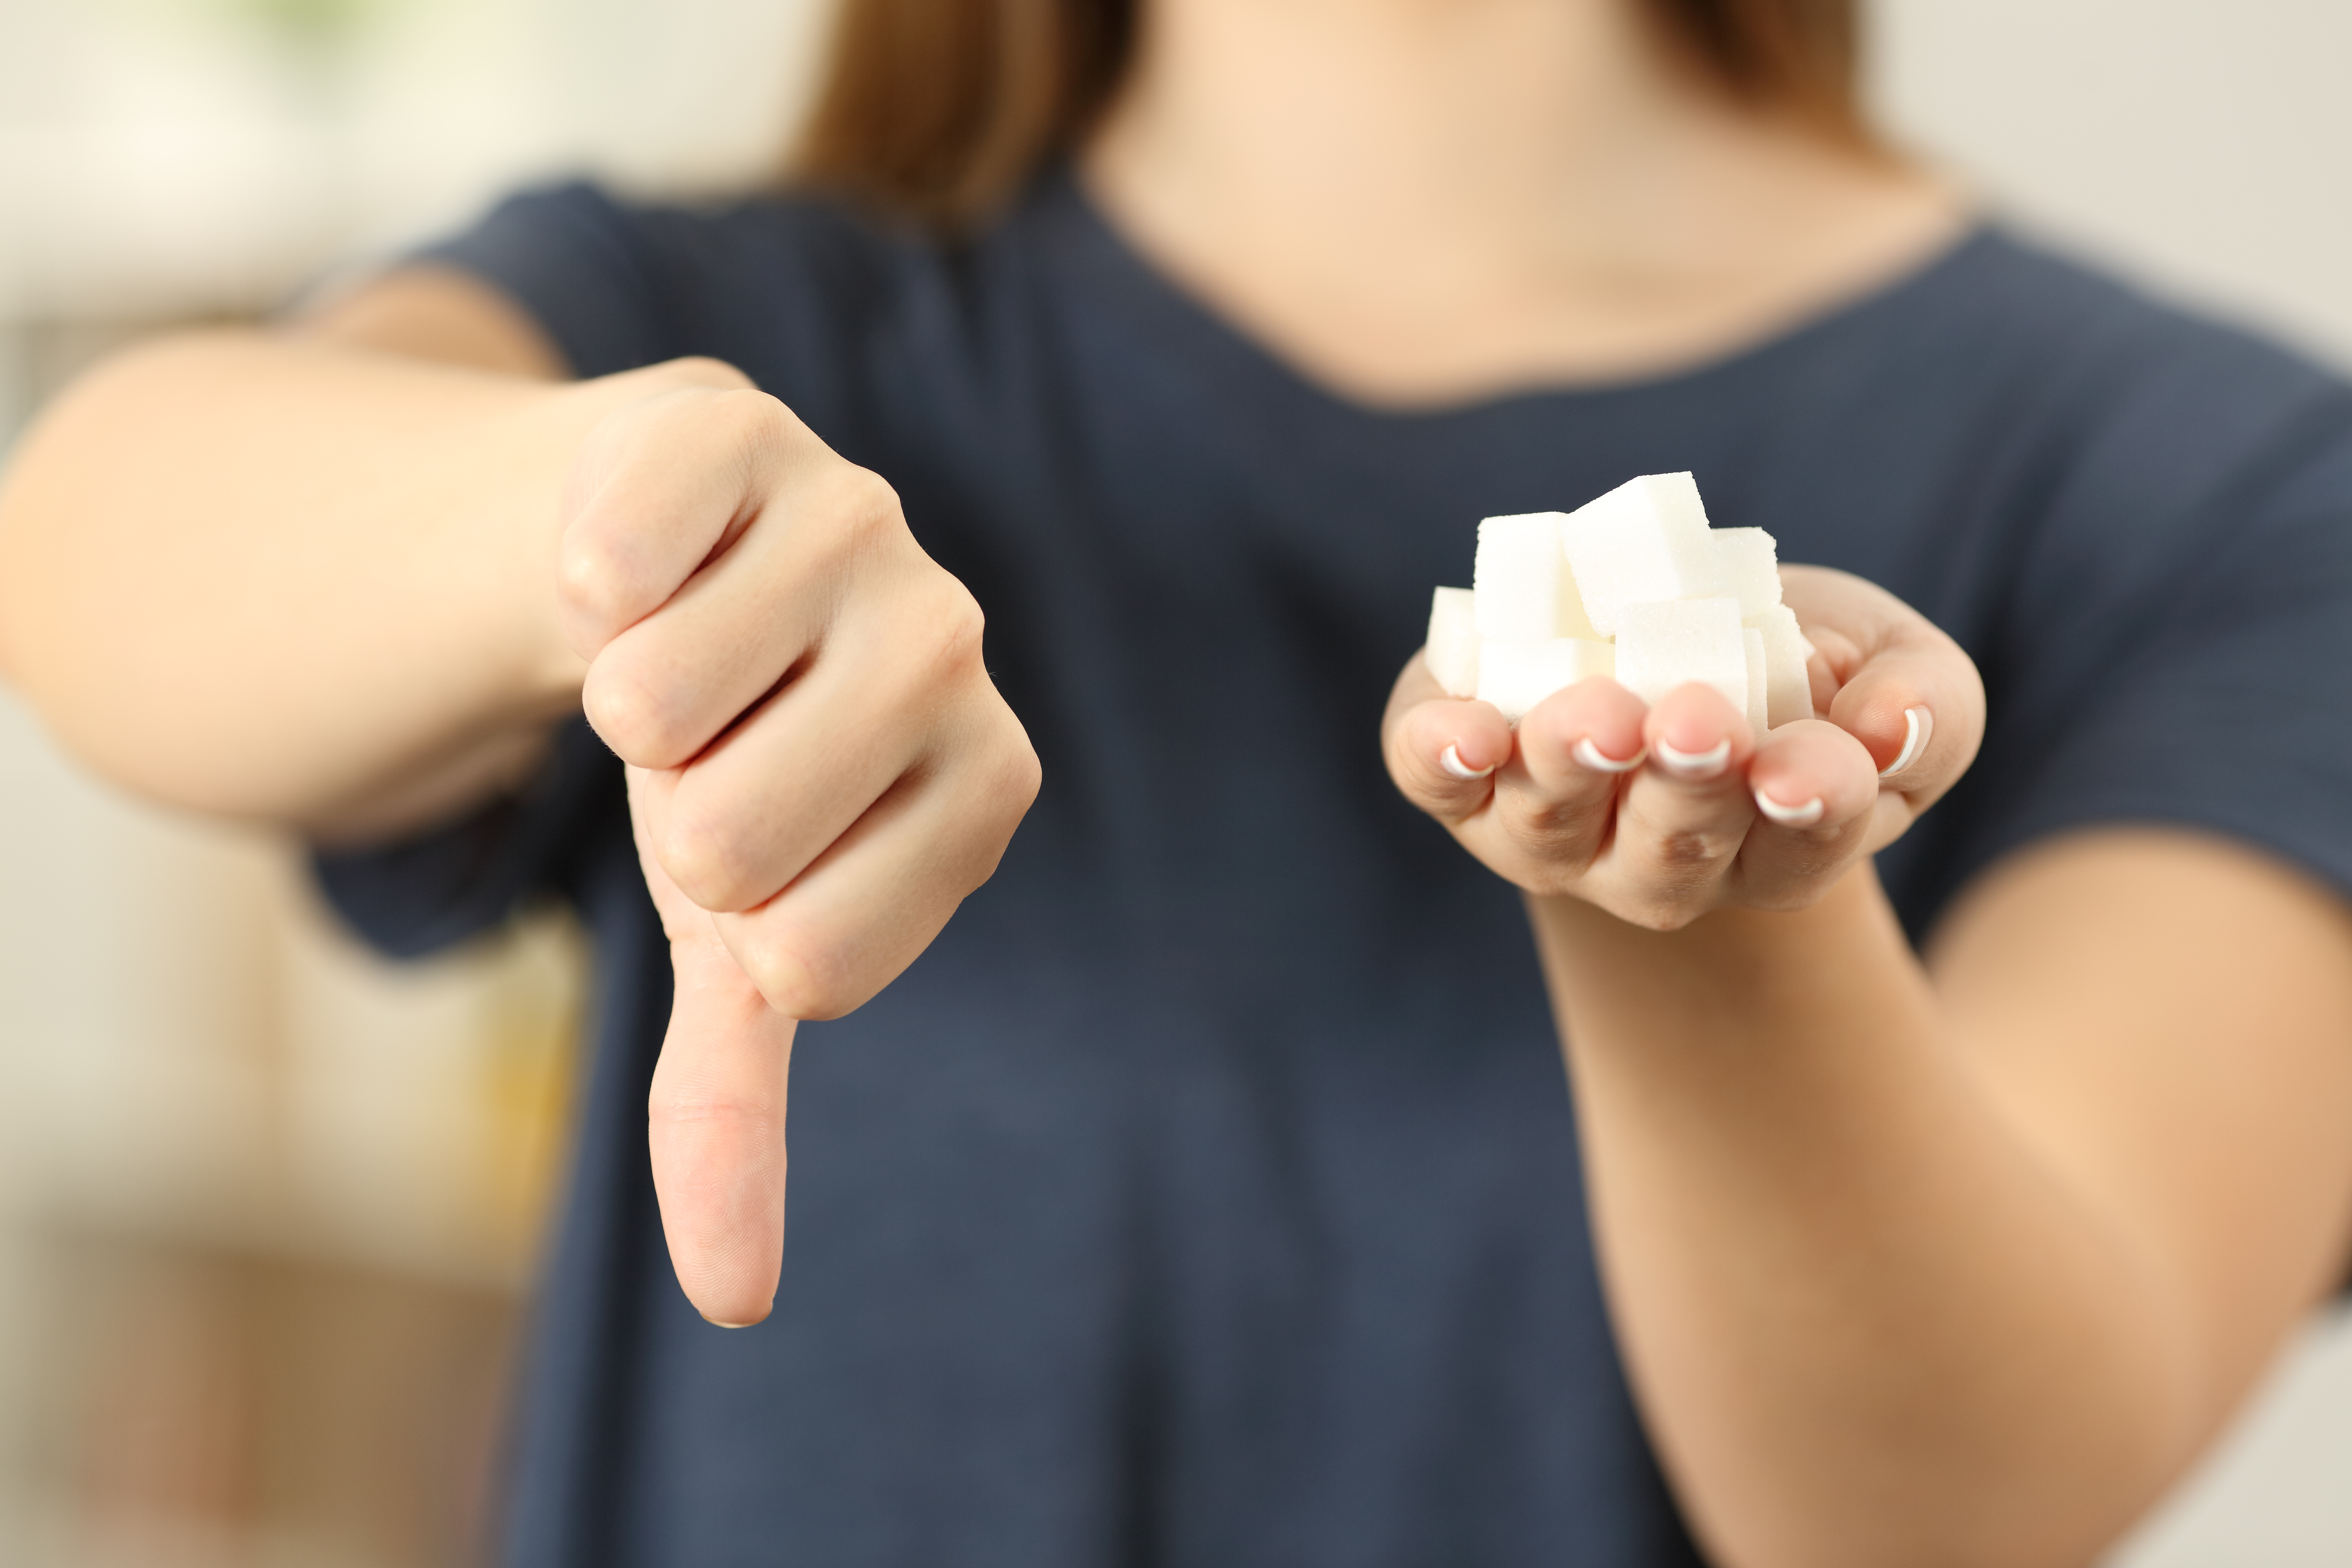 A woman holding sugar cubes in one hand while giving them the thumbs down with the other | Source: Shutterstock